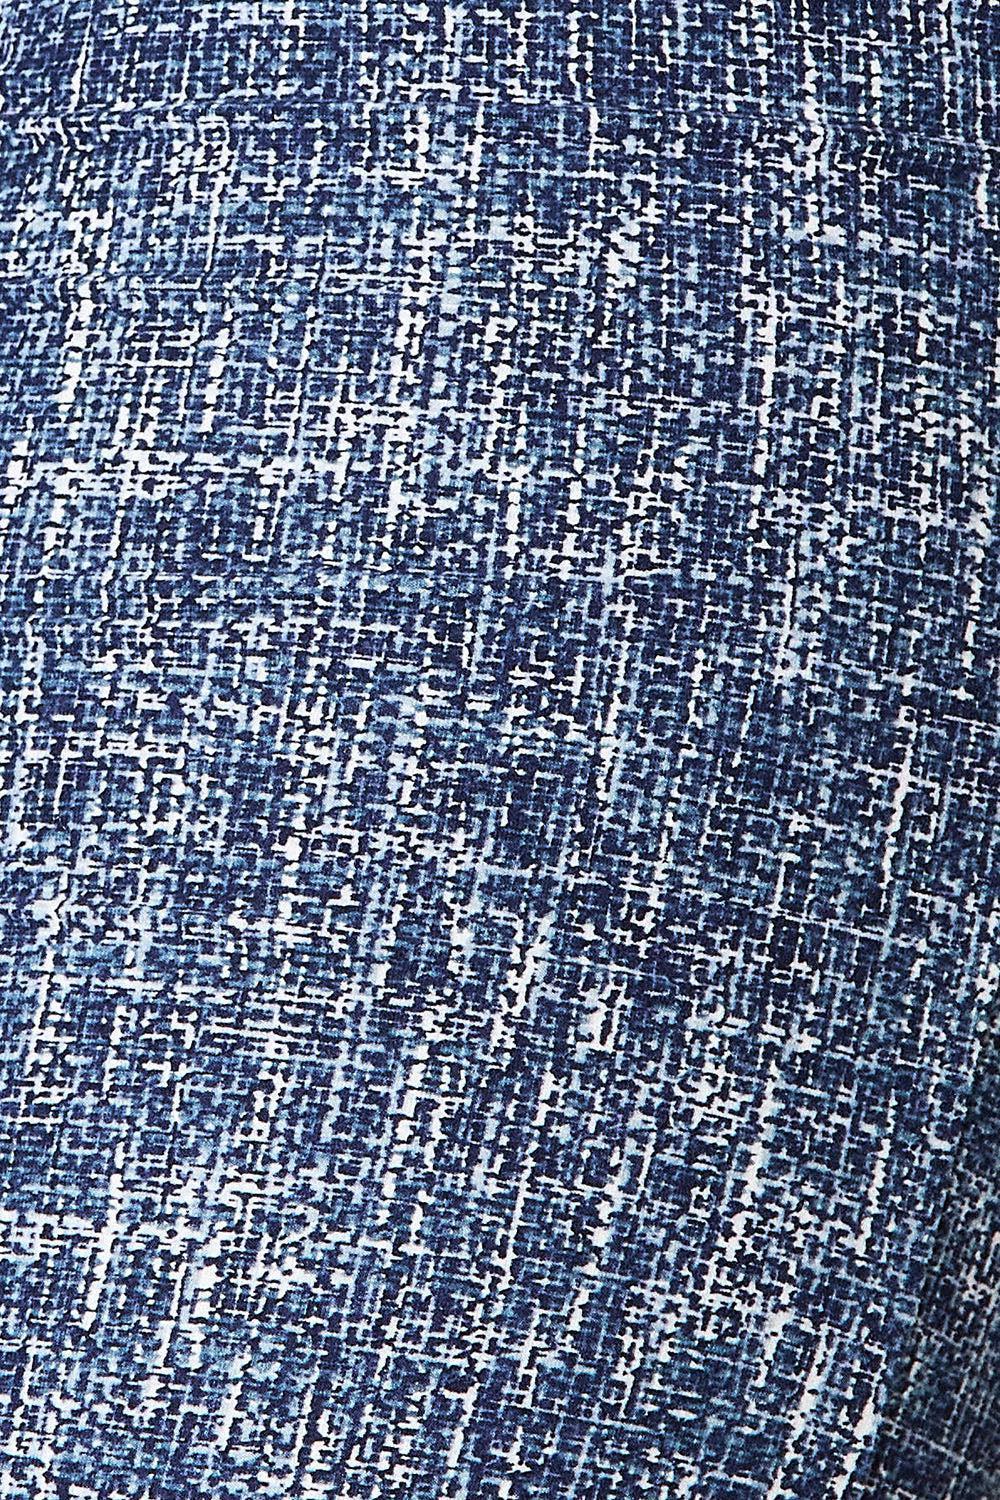 a close up of a blue and white shirt